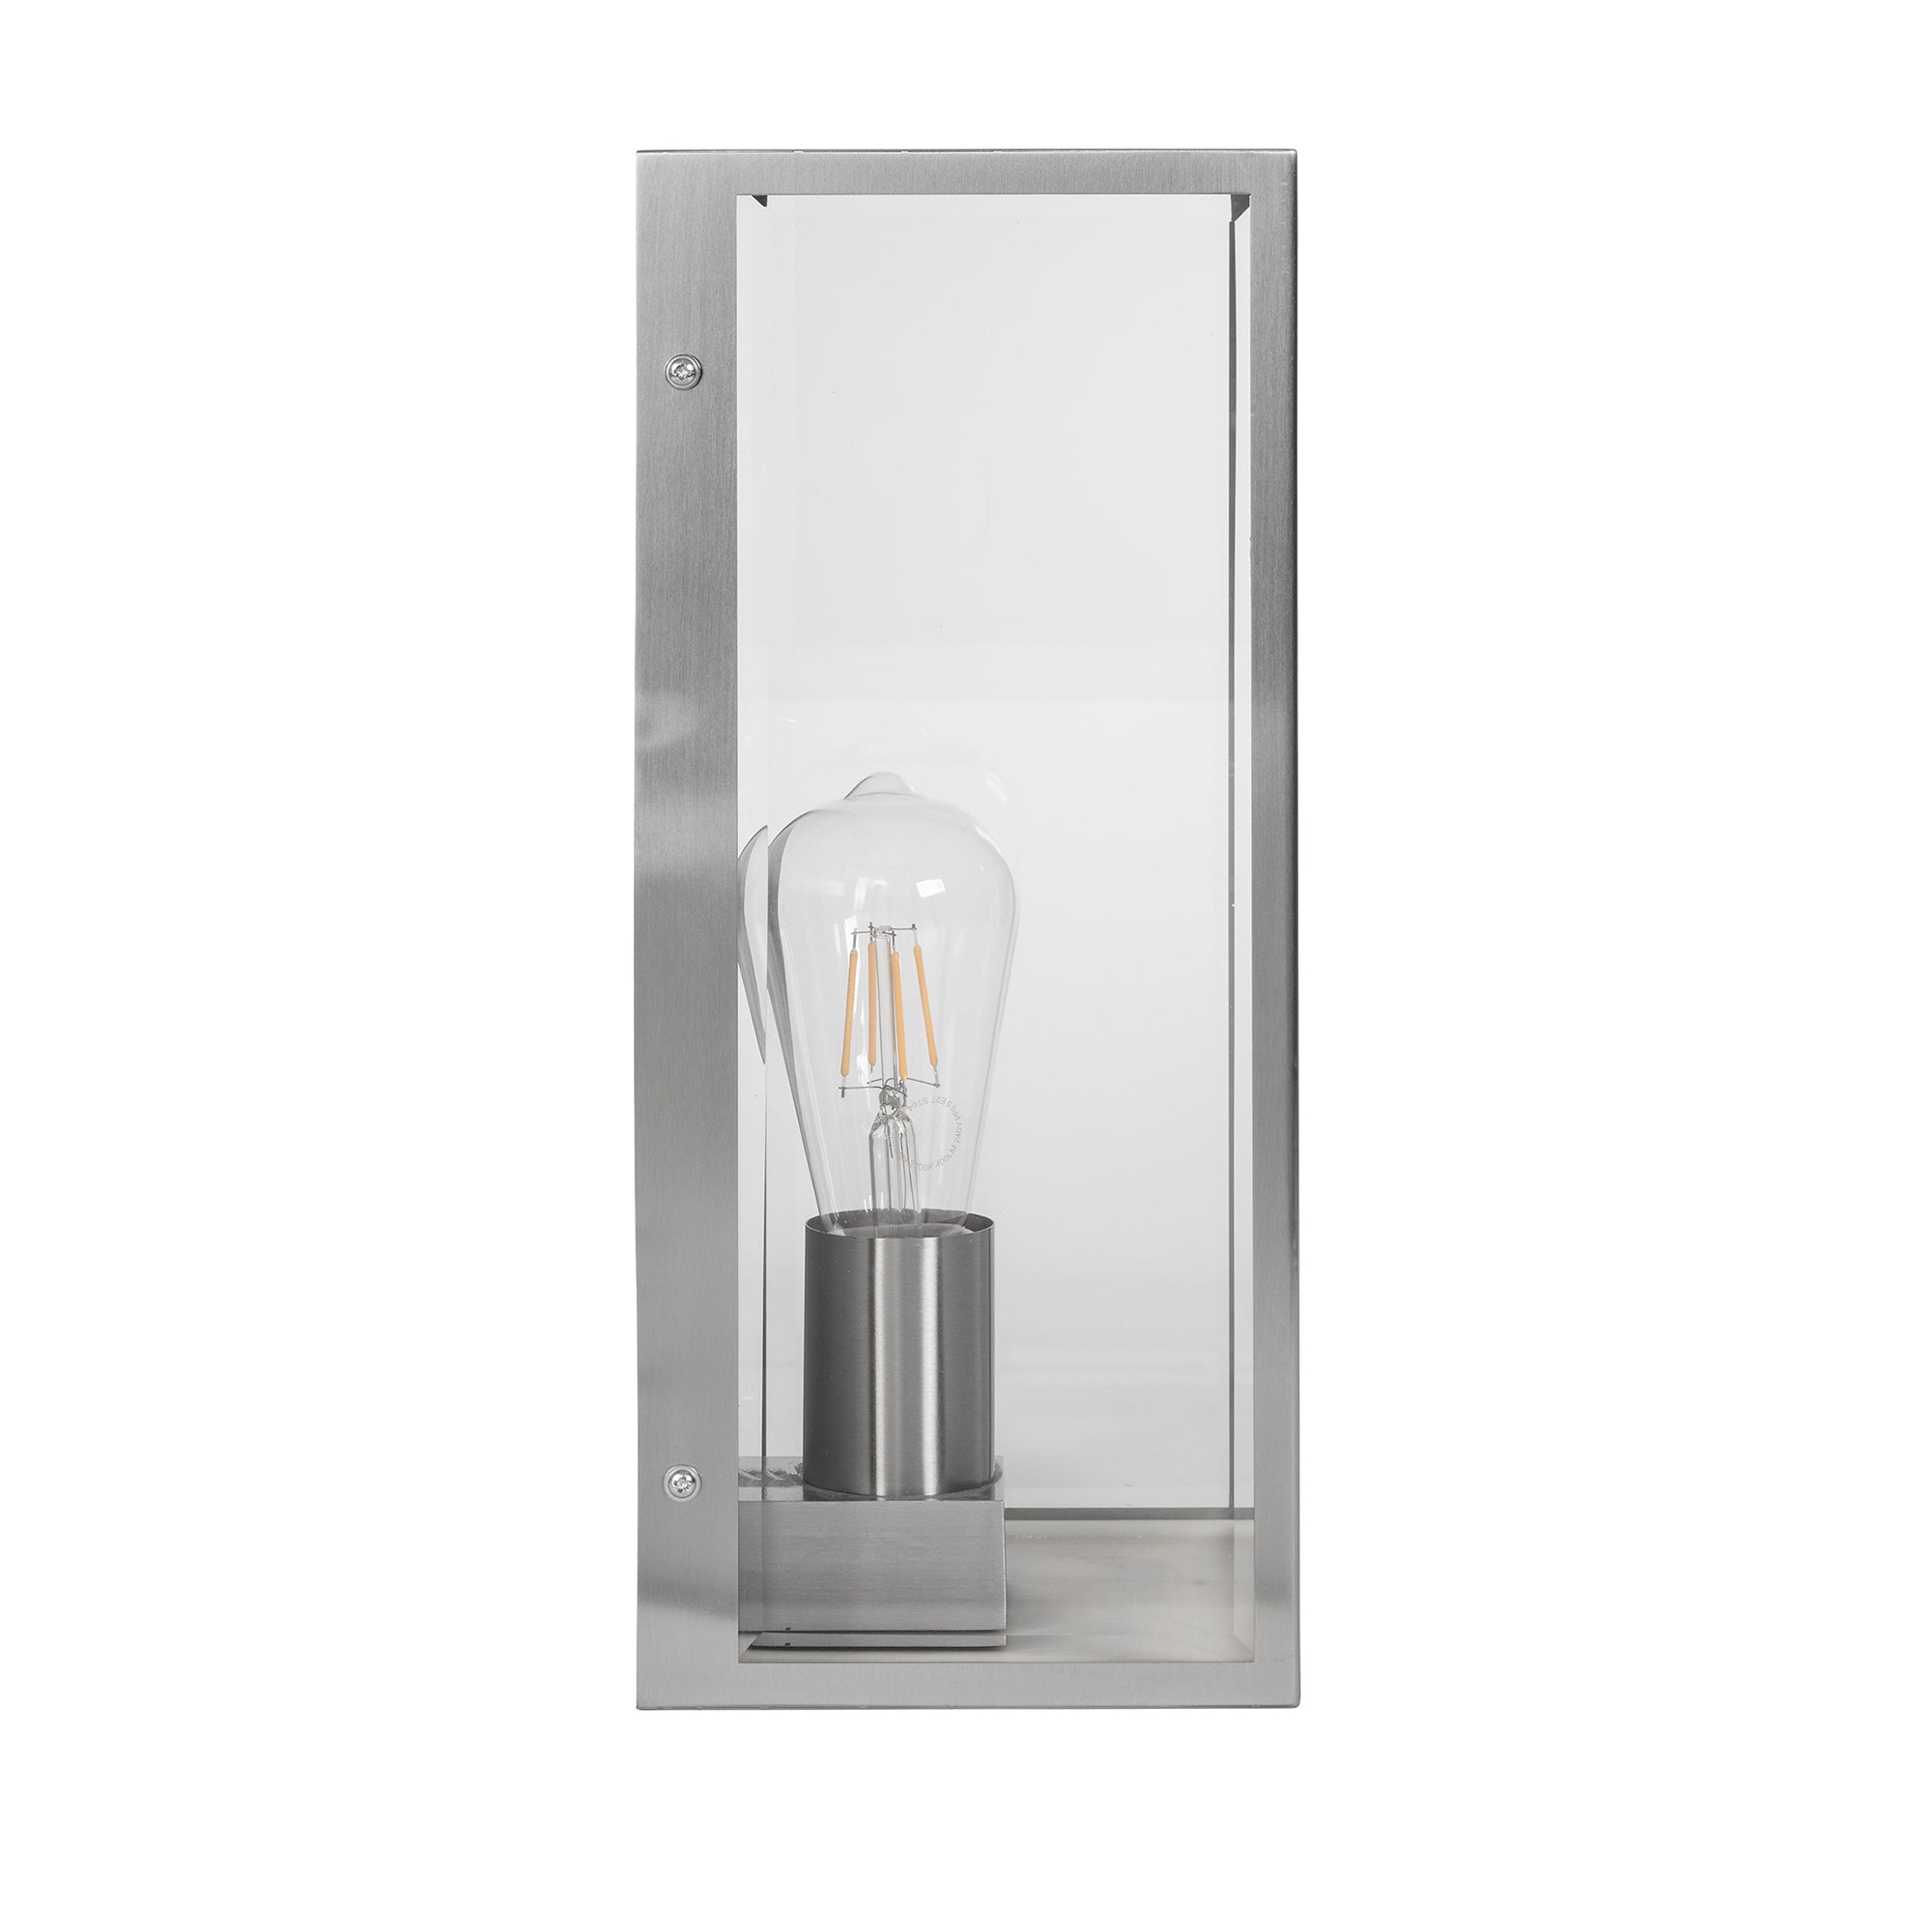 HV3659W-L-SS316 - Bayside Large 316 Stainless Steel Wall Light